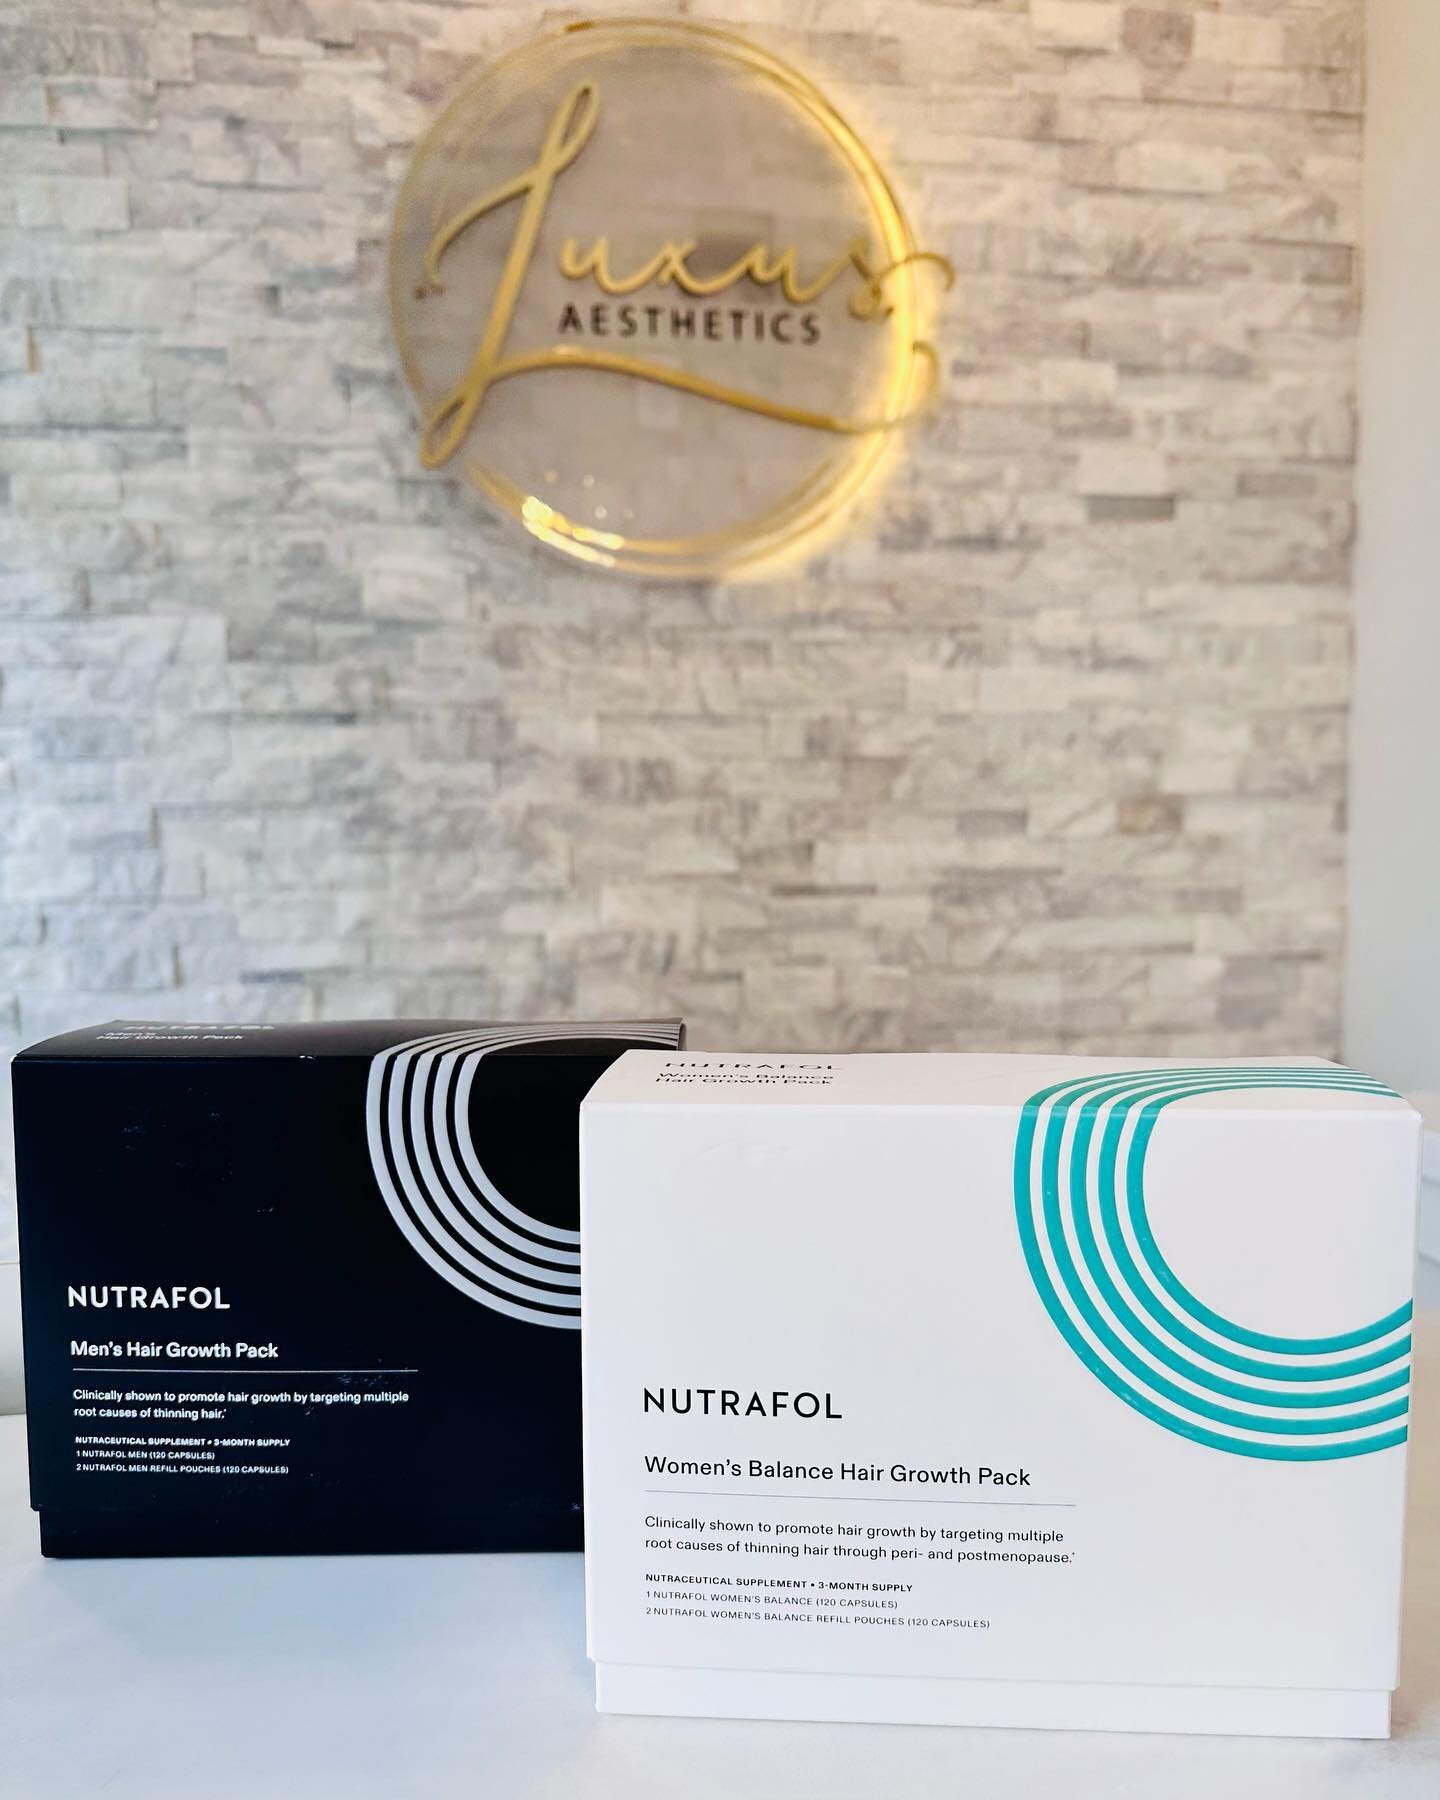 A daily hair growth supplement physician-formulated with natural ingredients to target root causes of thinning for visibly thicker hair volume and fuller scalp coverage. 🌱

Made with natural ingredients to target root causes of thinning&mdash;like h